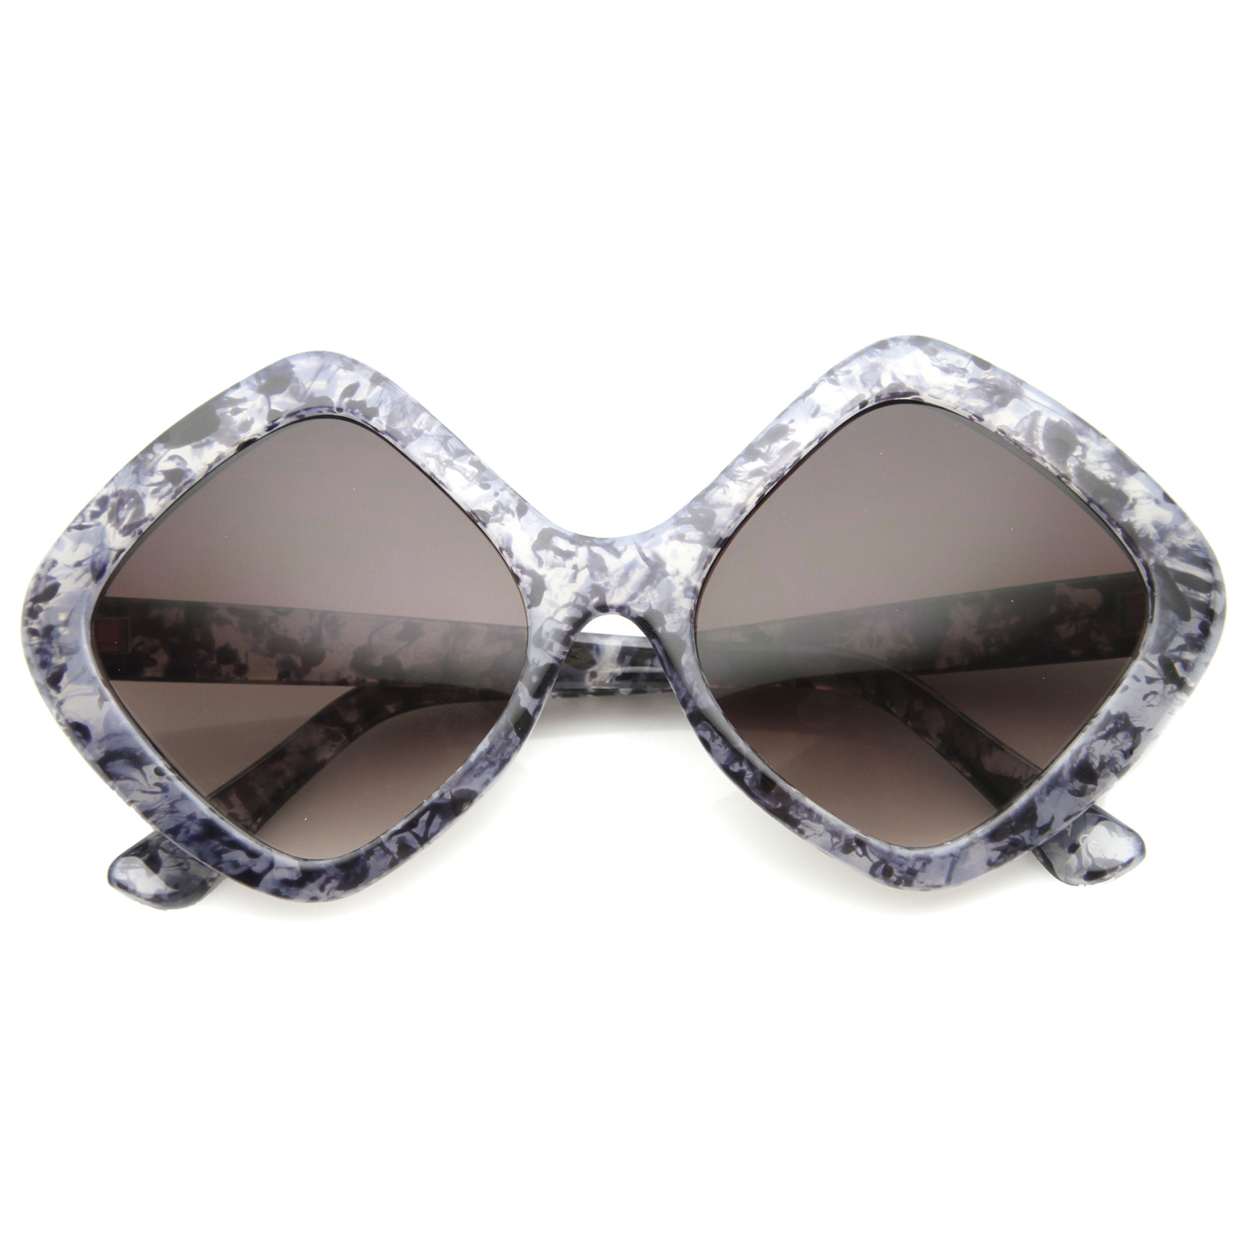 Womens Oversized Sunglasses With UV400 Protected Gradient Lens 9968 - Grey Block-Tortoise